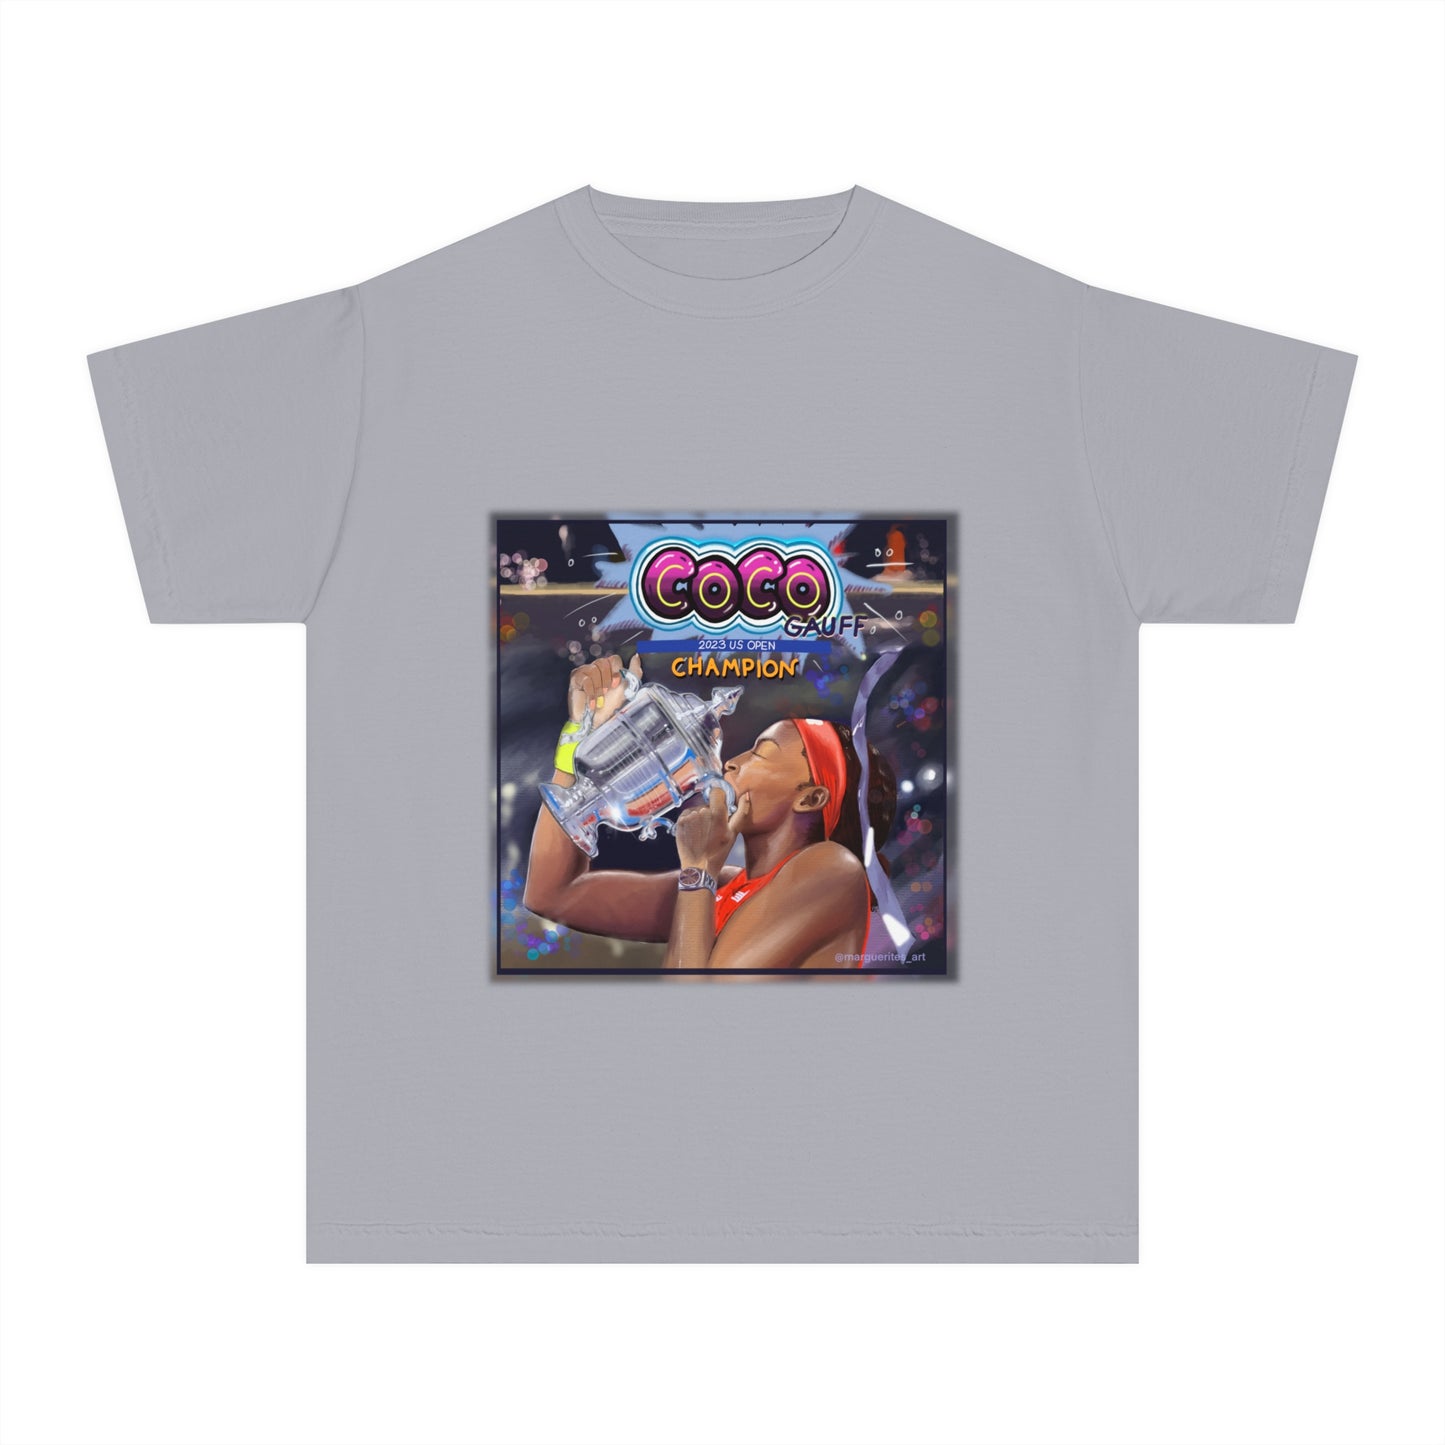 Celebrating Tennis Champ Coco Gauff - Youth Mid-weight Tee